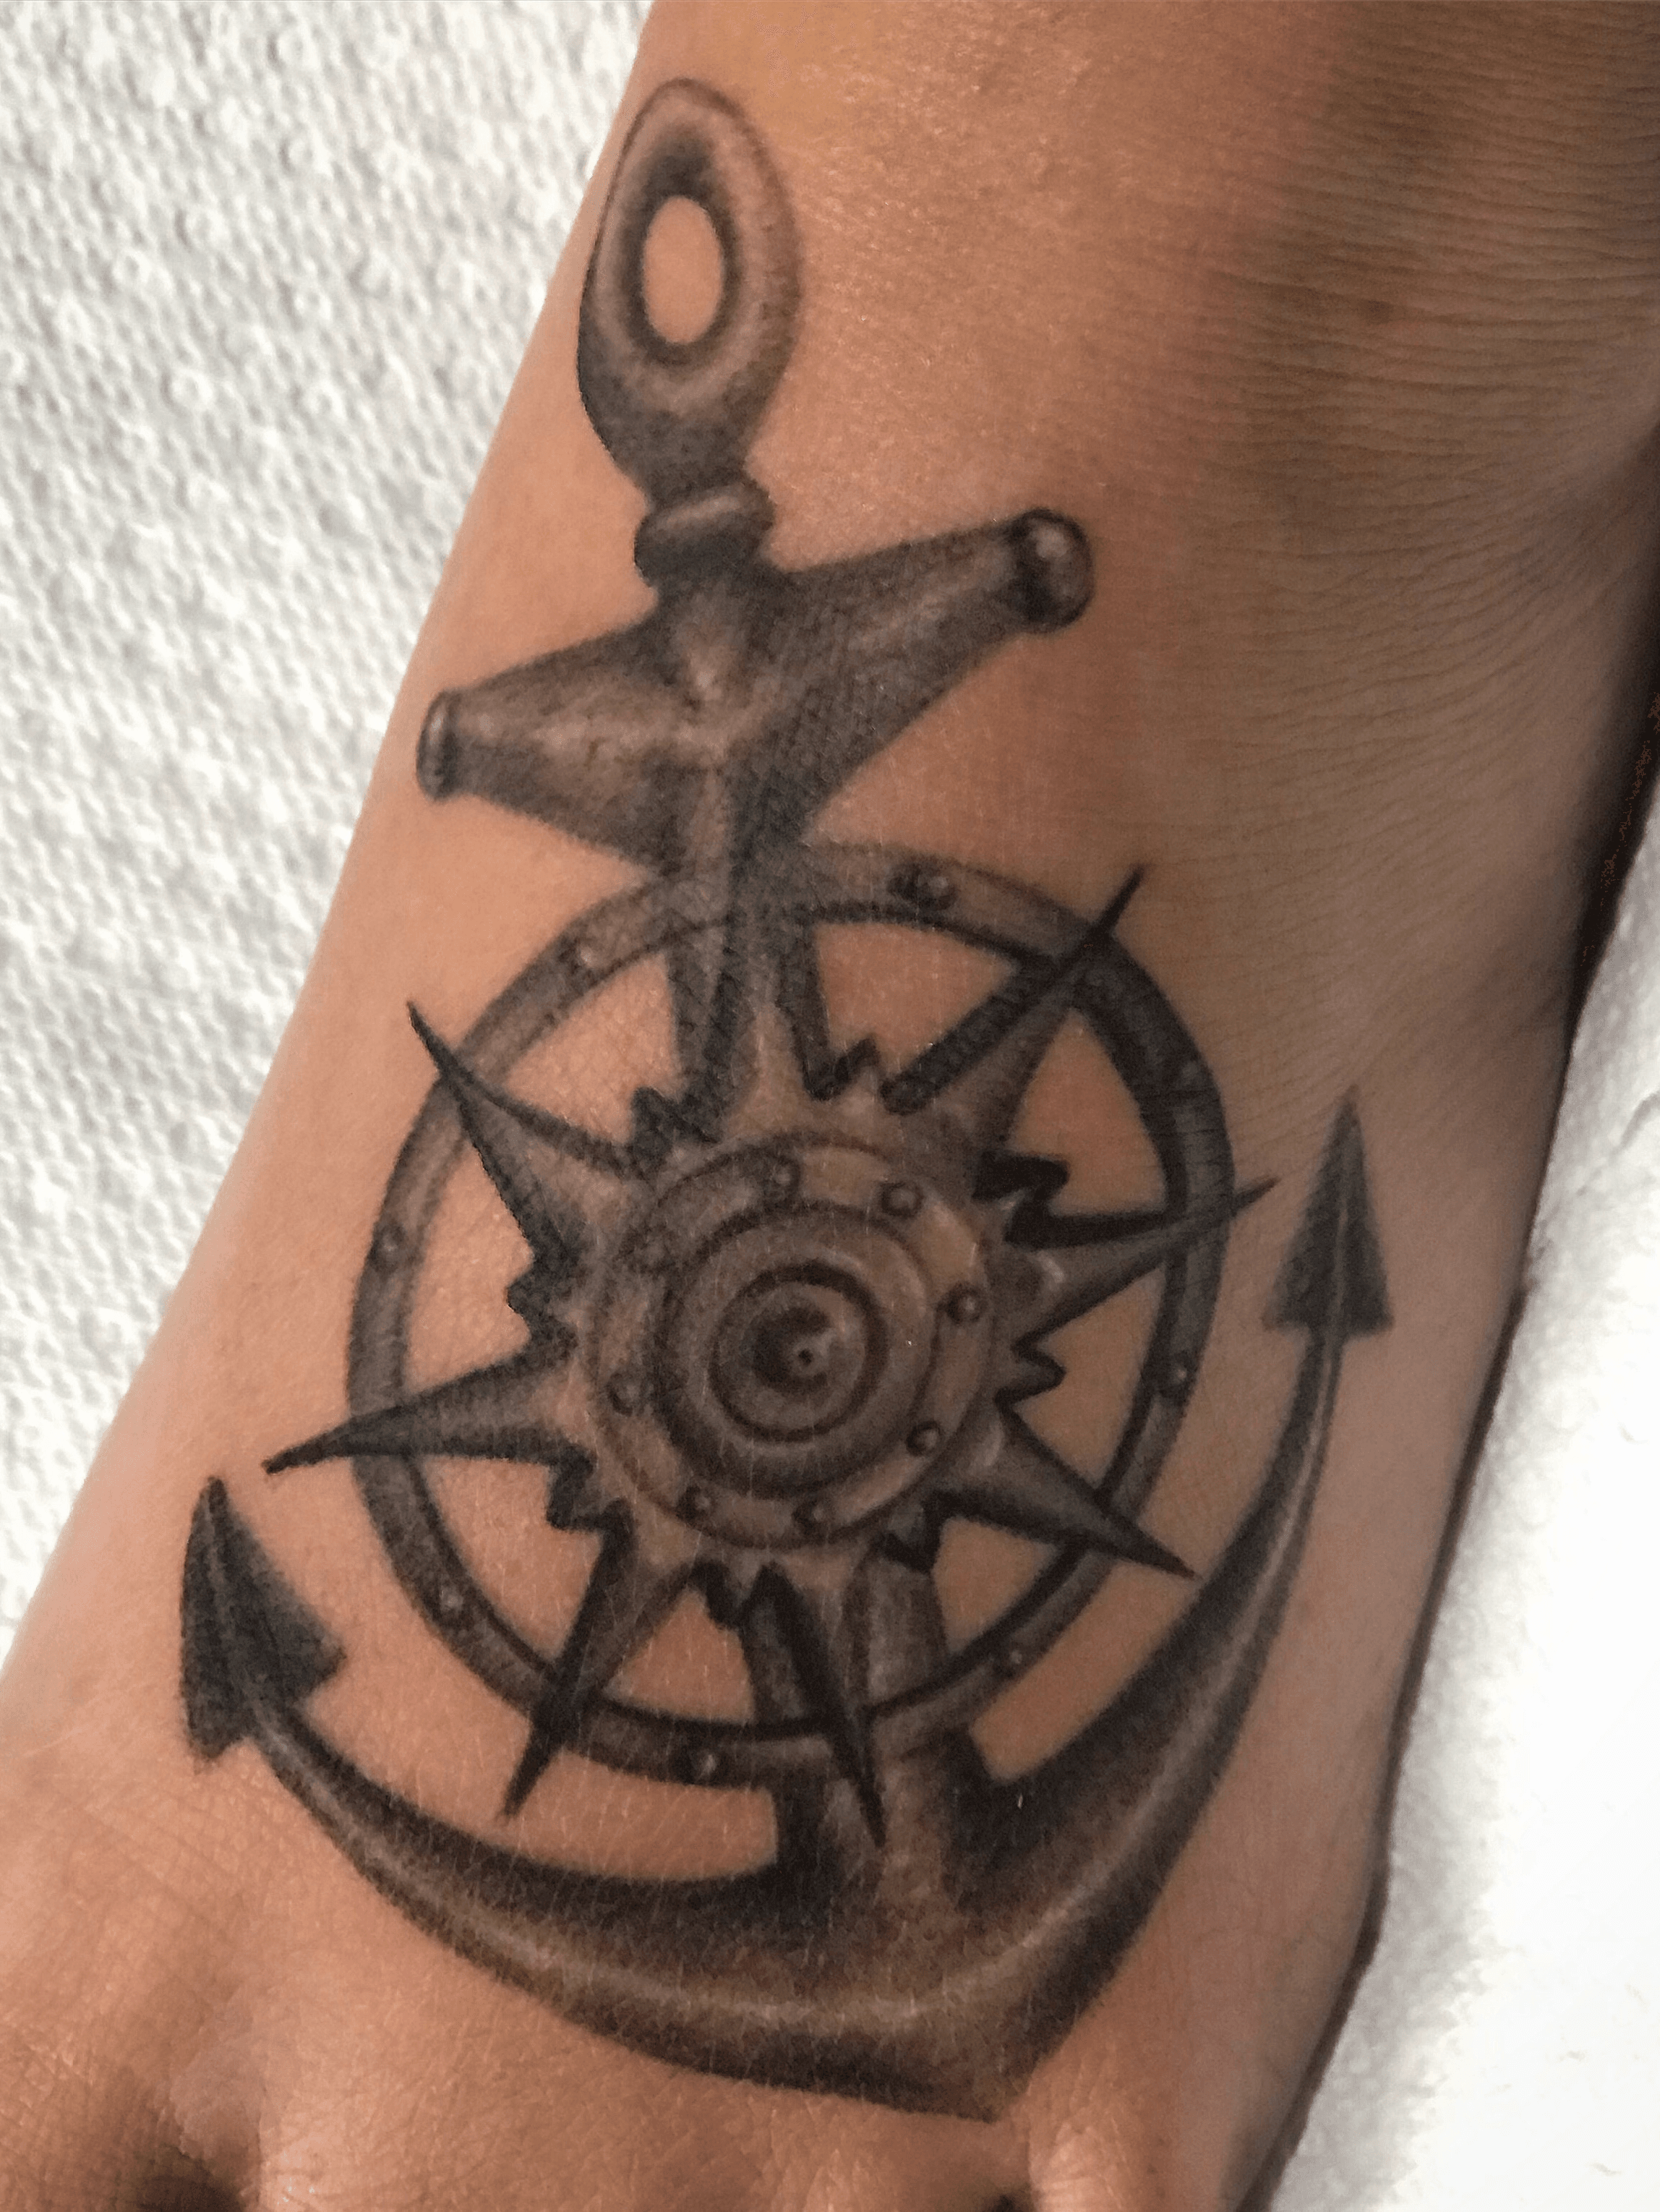 39 Anchor Tattoos On Foot